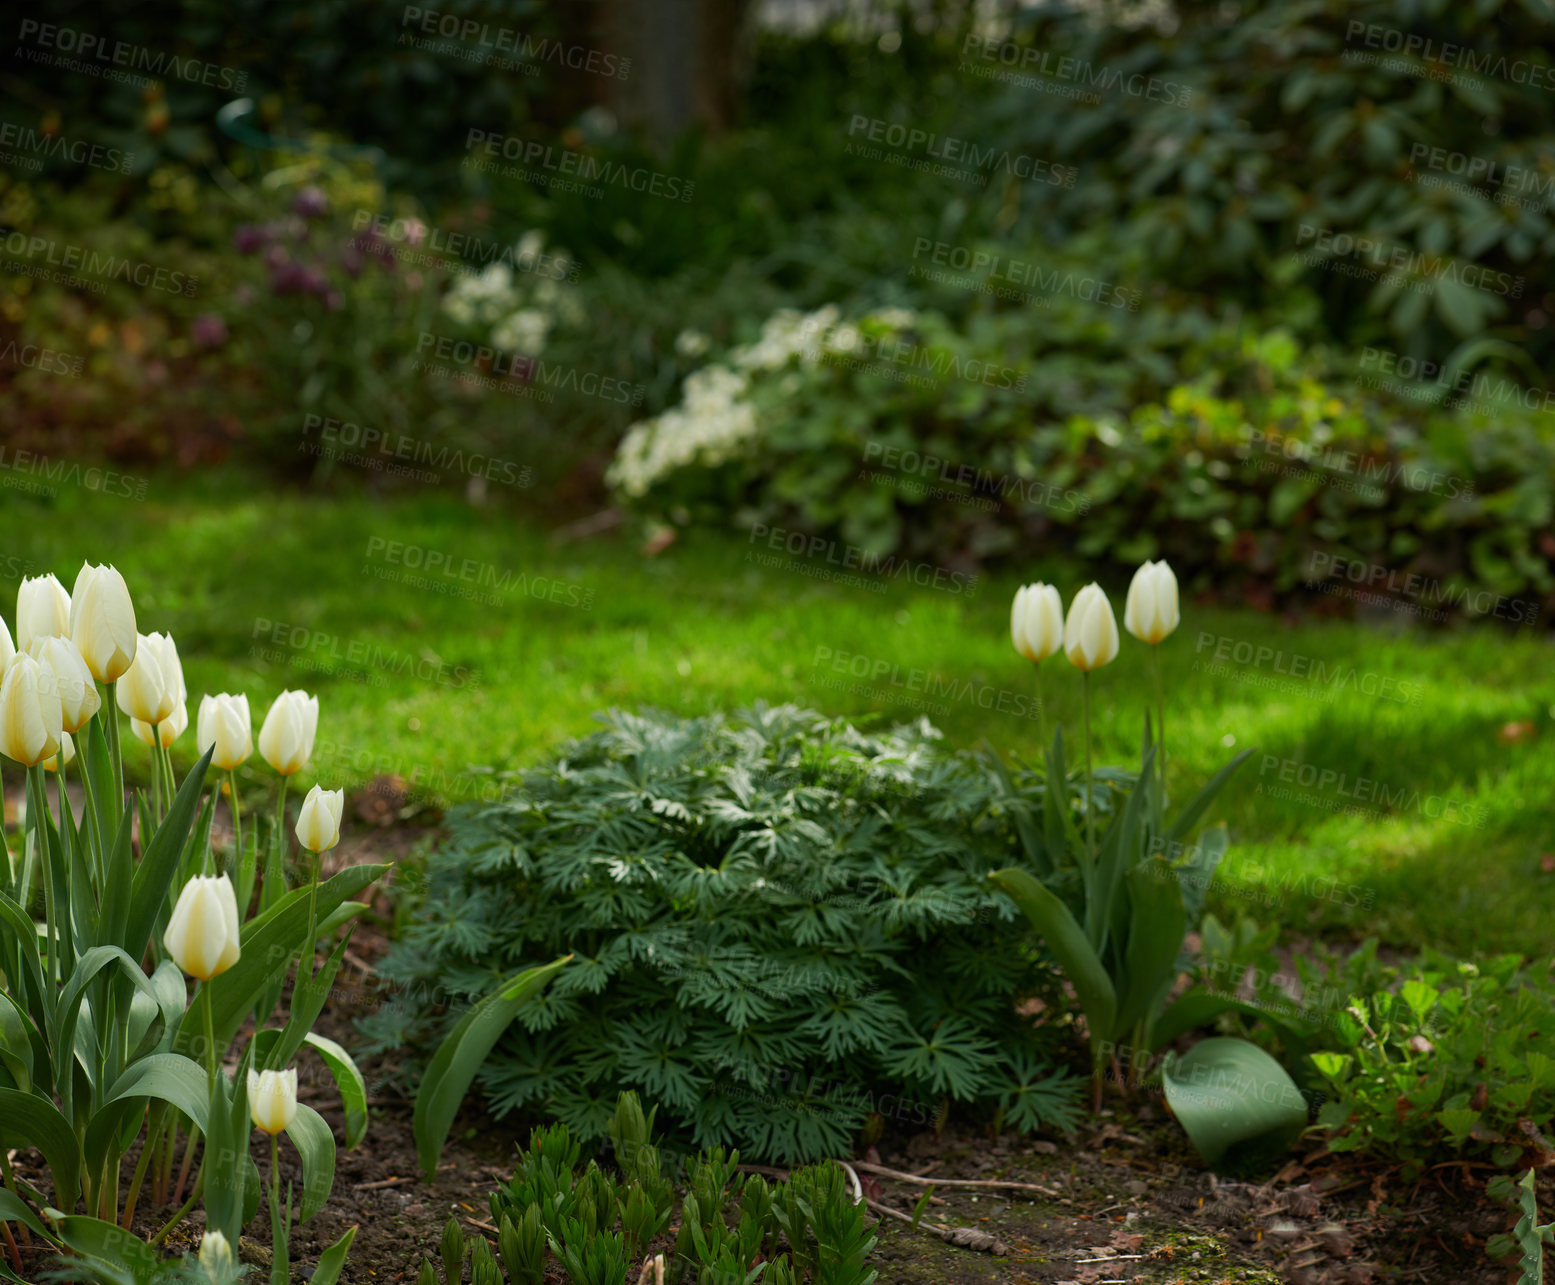 Buy stock photo Tulips growing in a lush green backyard garden. Beautiful flowering plant blooming on the lawn. Pretty white flowers budding among greenery in spring. Flora flourishing on a grass plot in nature
